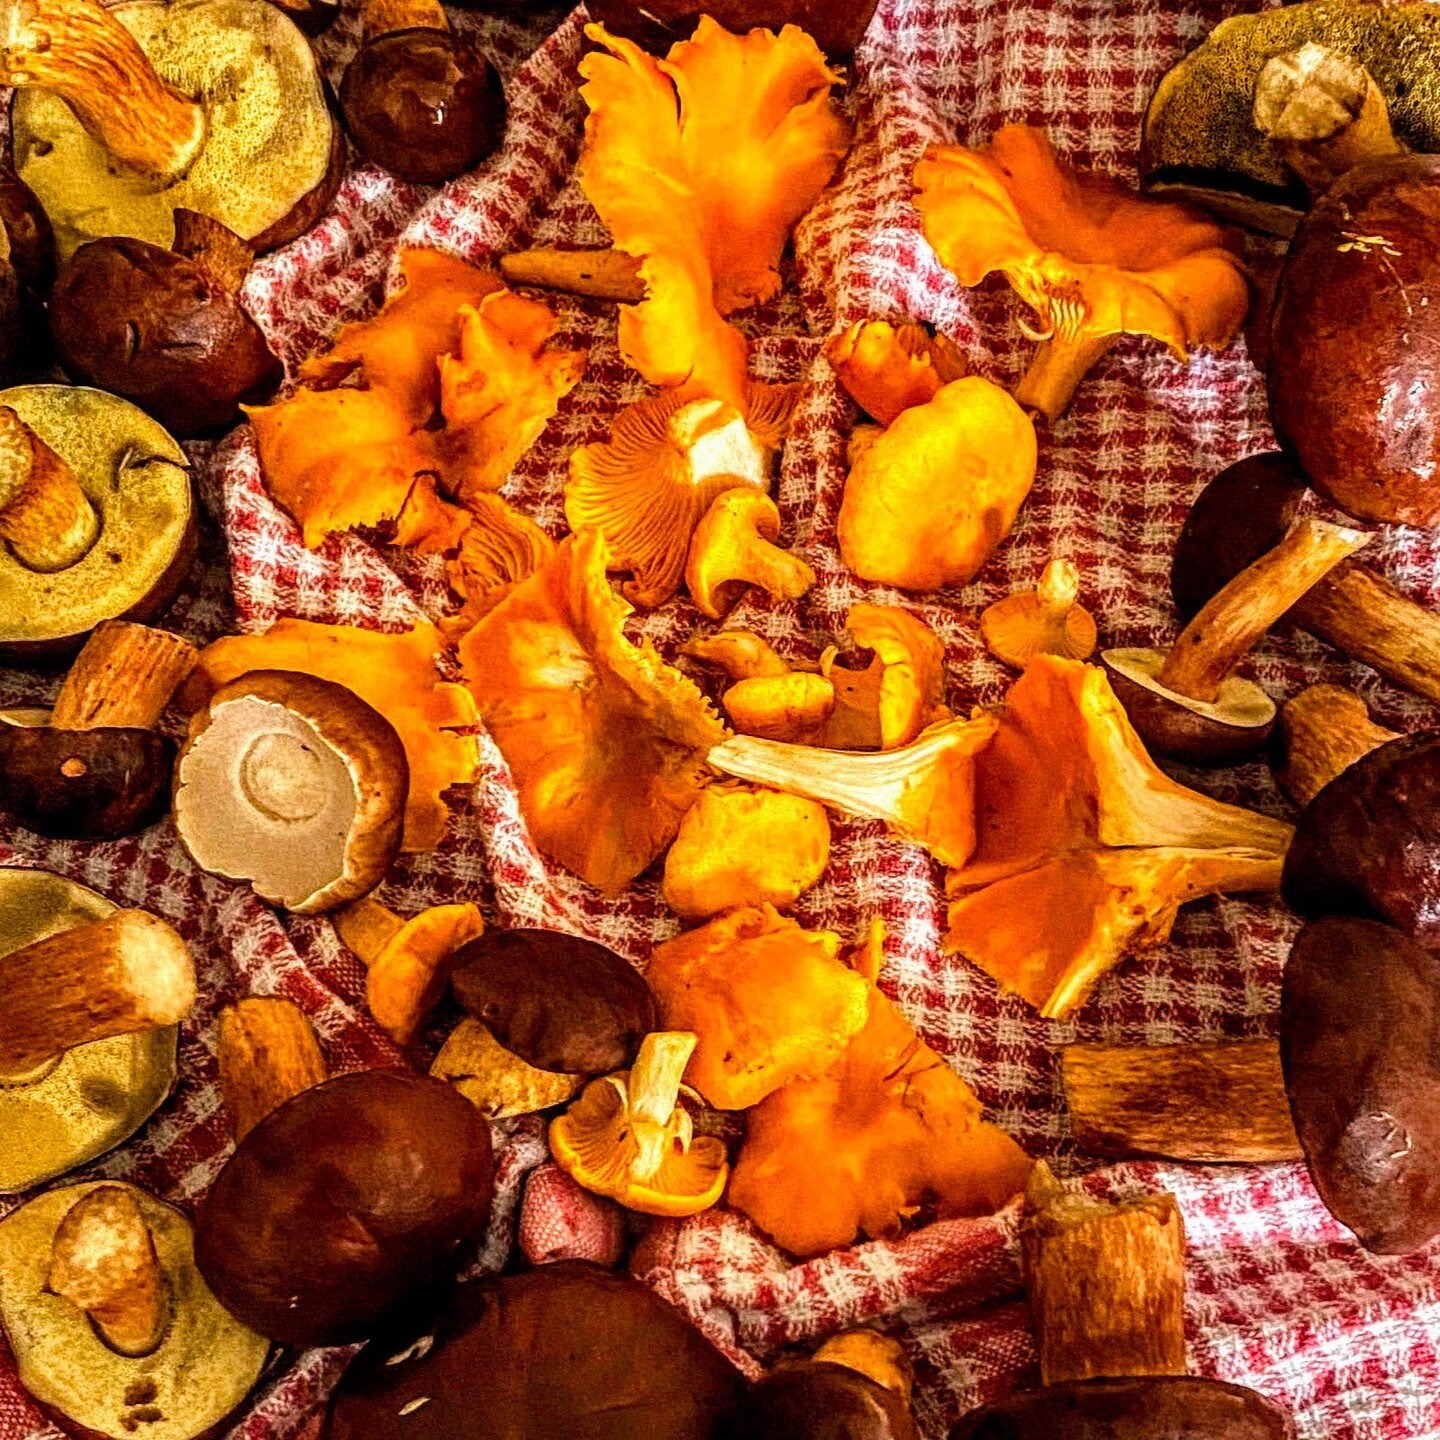 Bringing home the gold from the woods &ndash; our basket brimming with a bounty of chantarelles! 🍄 These vibrant, golden beauties are truly the hidden treasures of our forests. An afternoon well spent, foraging, exploring, and respecting nature's ge